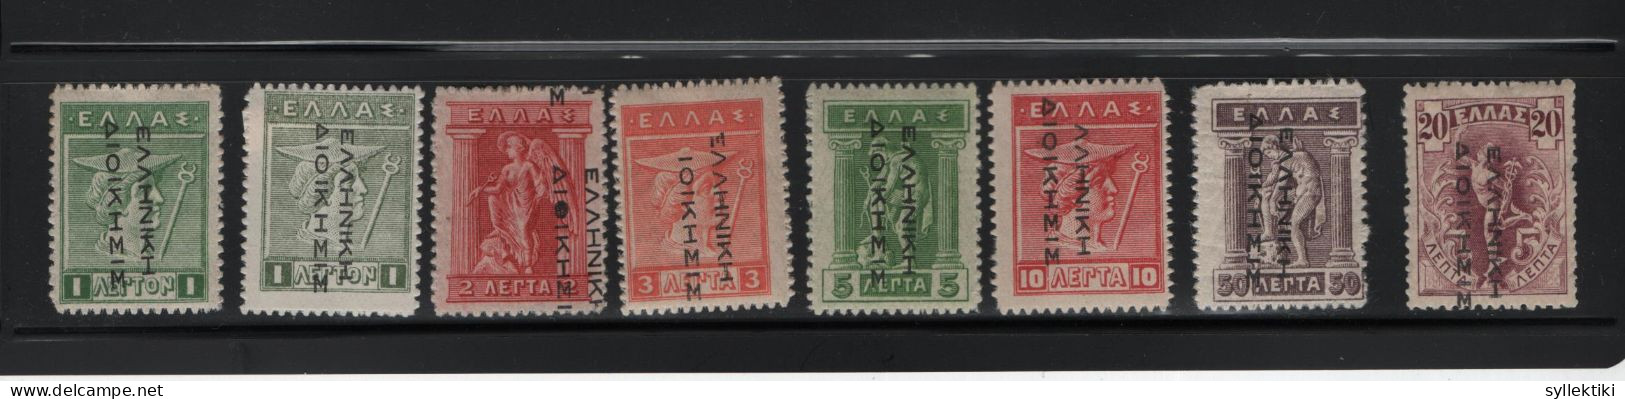 GREECE 1913 GREEK ADMIN READING DOWN 1 LEPTON - 20 LEPTA 8 DIFFERENT MH STAMPS  HELLAS No 251 - 255, 258 - 260 AND VALU - Ungebraucht